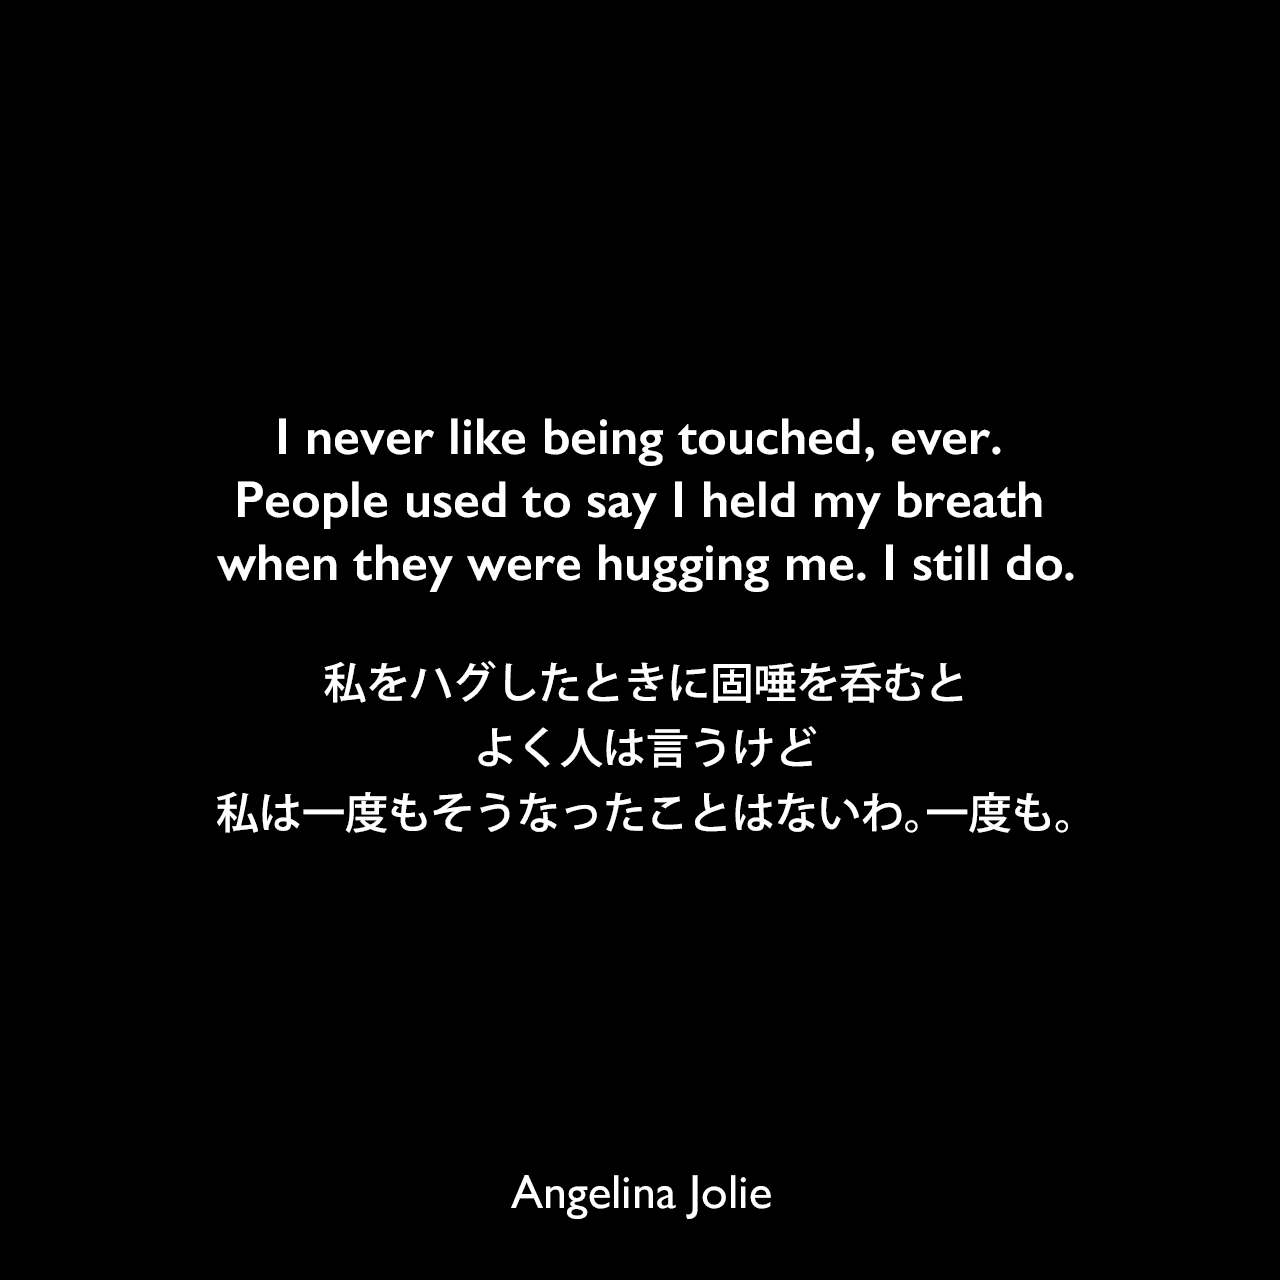 I never like being touched, ever. People used to say I held my breath when they were hugging me. I still do.私をハグしたときに固唾を呑むとよく人は言うけど私は一度もそうなったことはないわ。一度も。Angelina Jolie